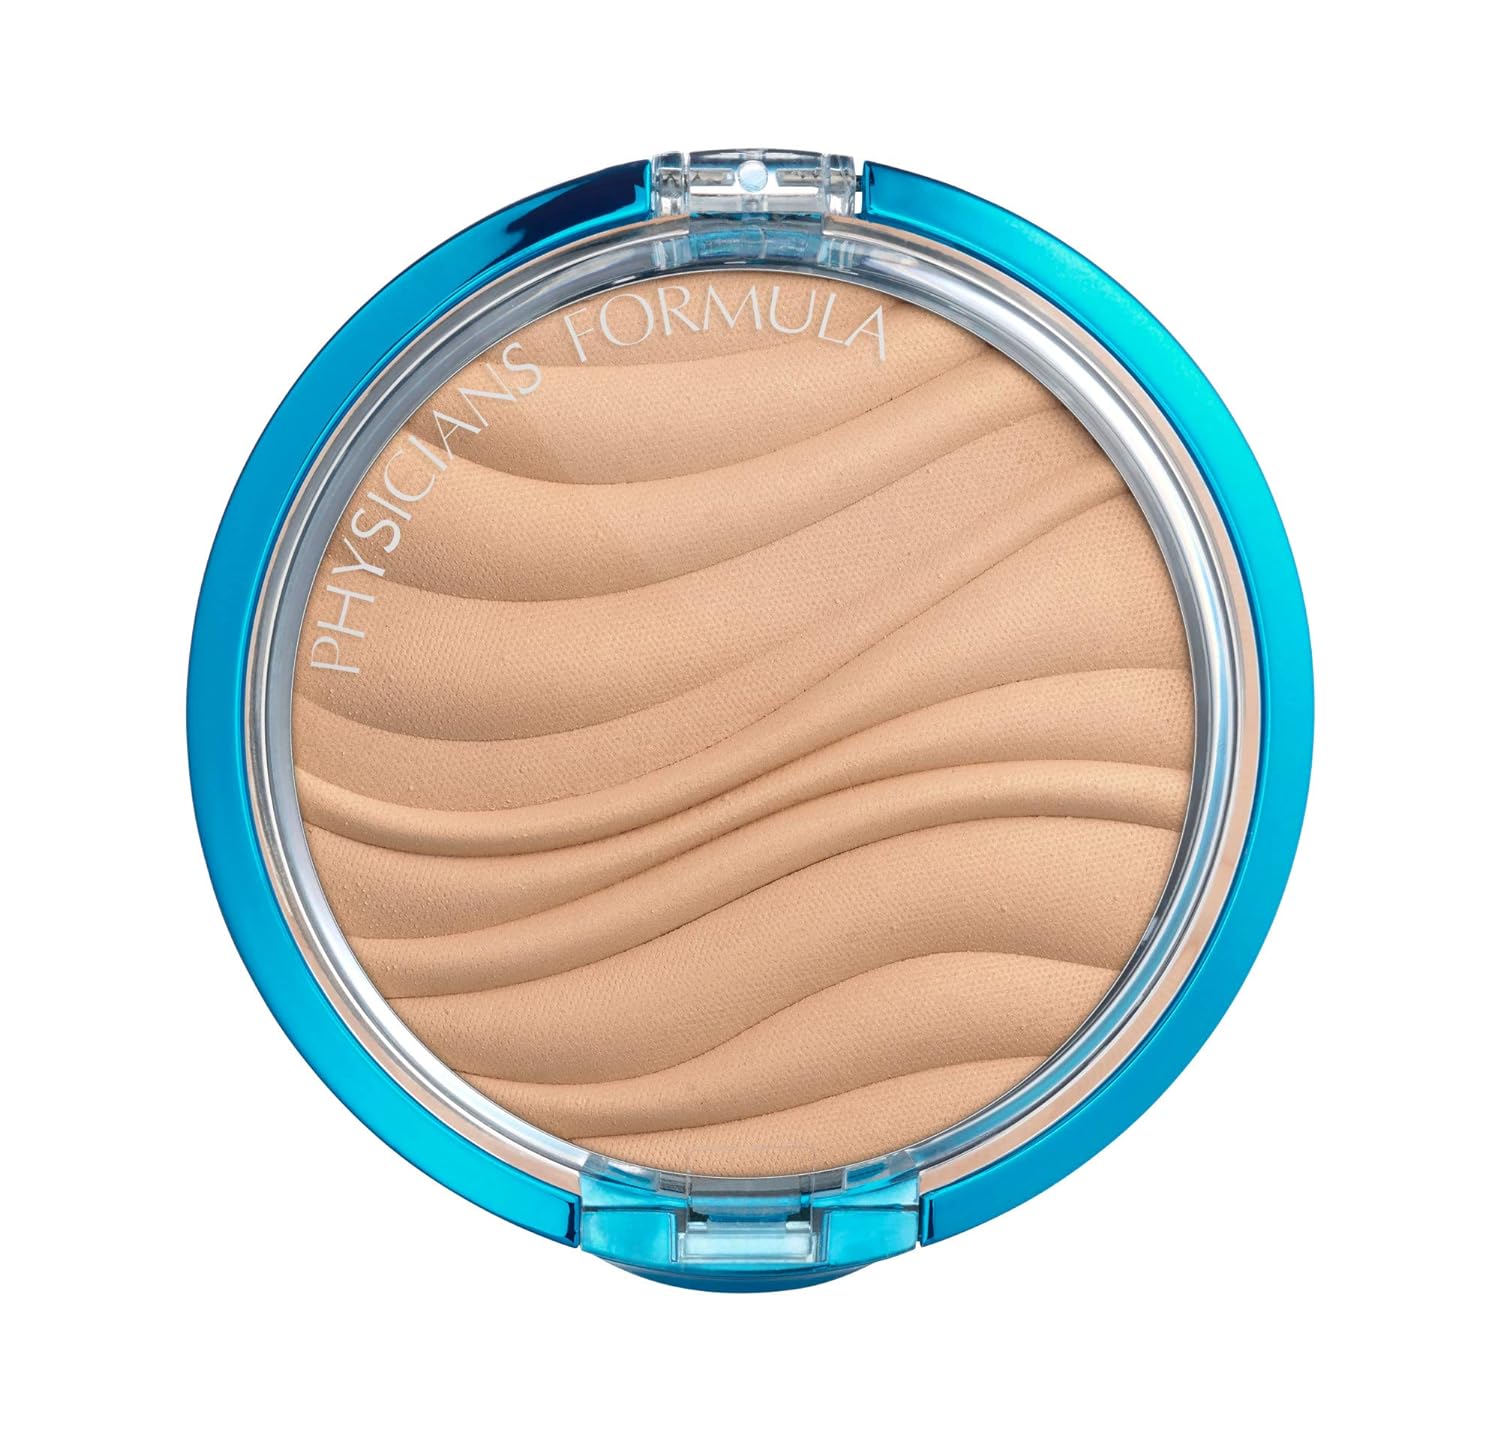  Physicians Formula Mineral Wear Talc-Free Pressed Powder- SPF 30 - Mineral Makeup Airbrushing -Translucent